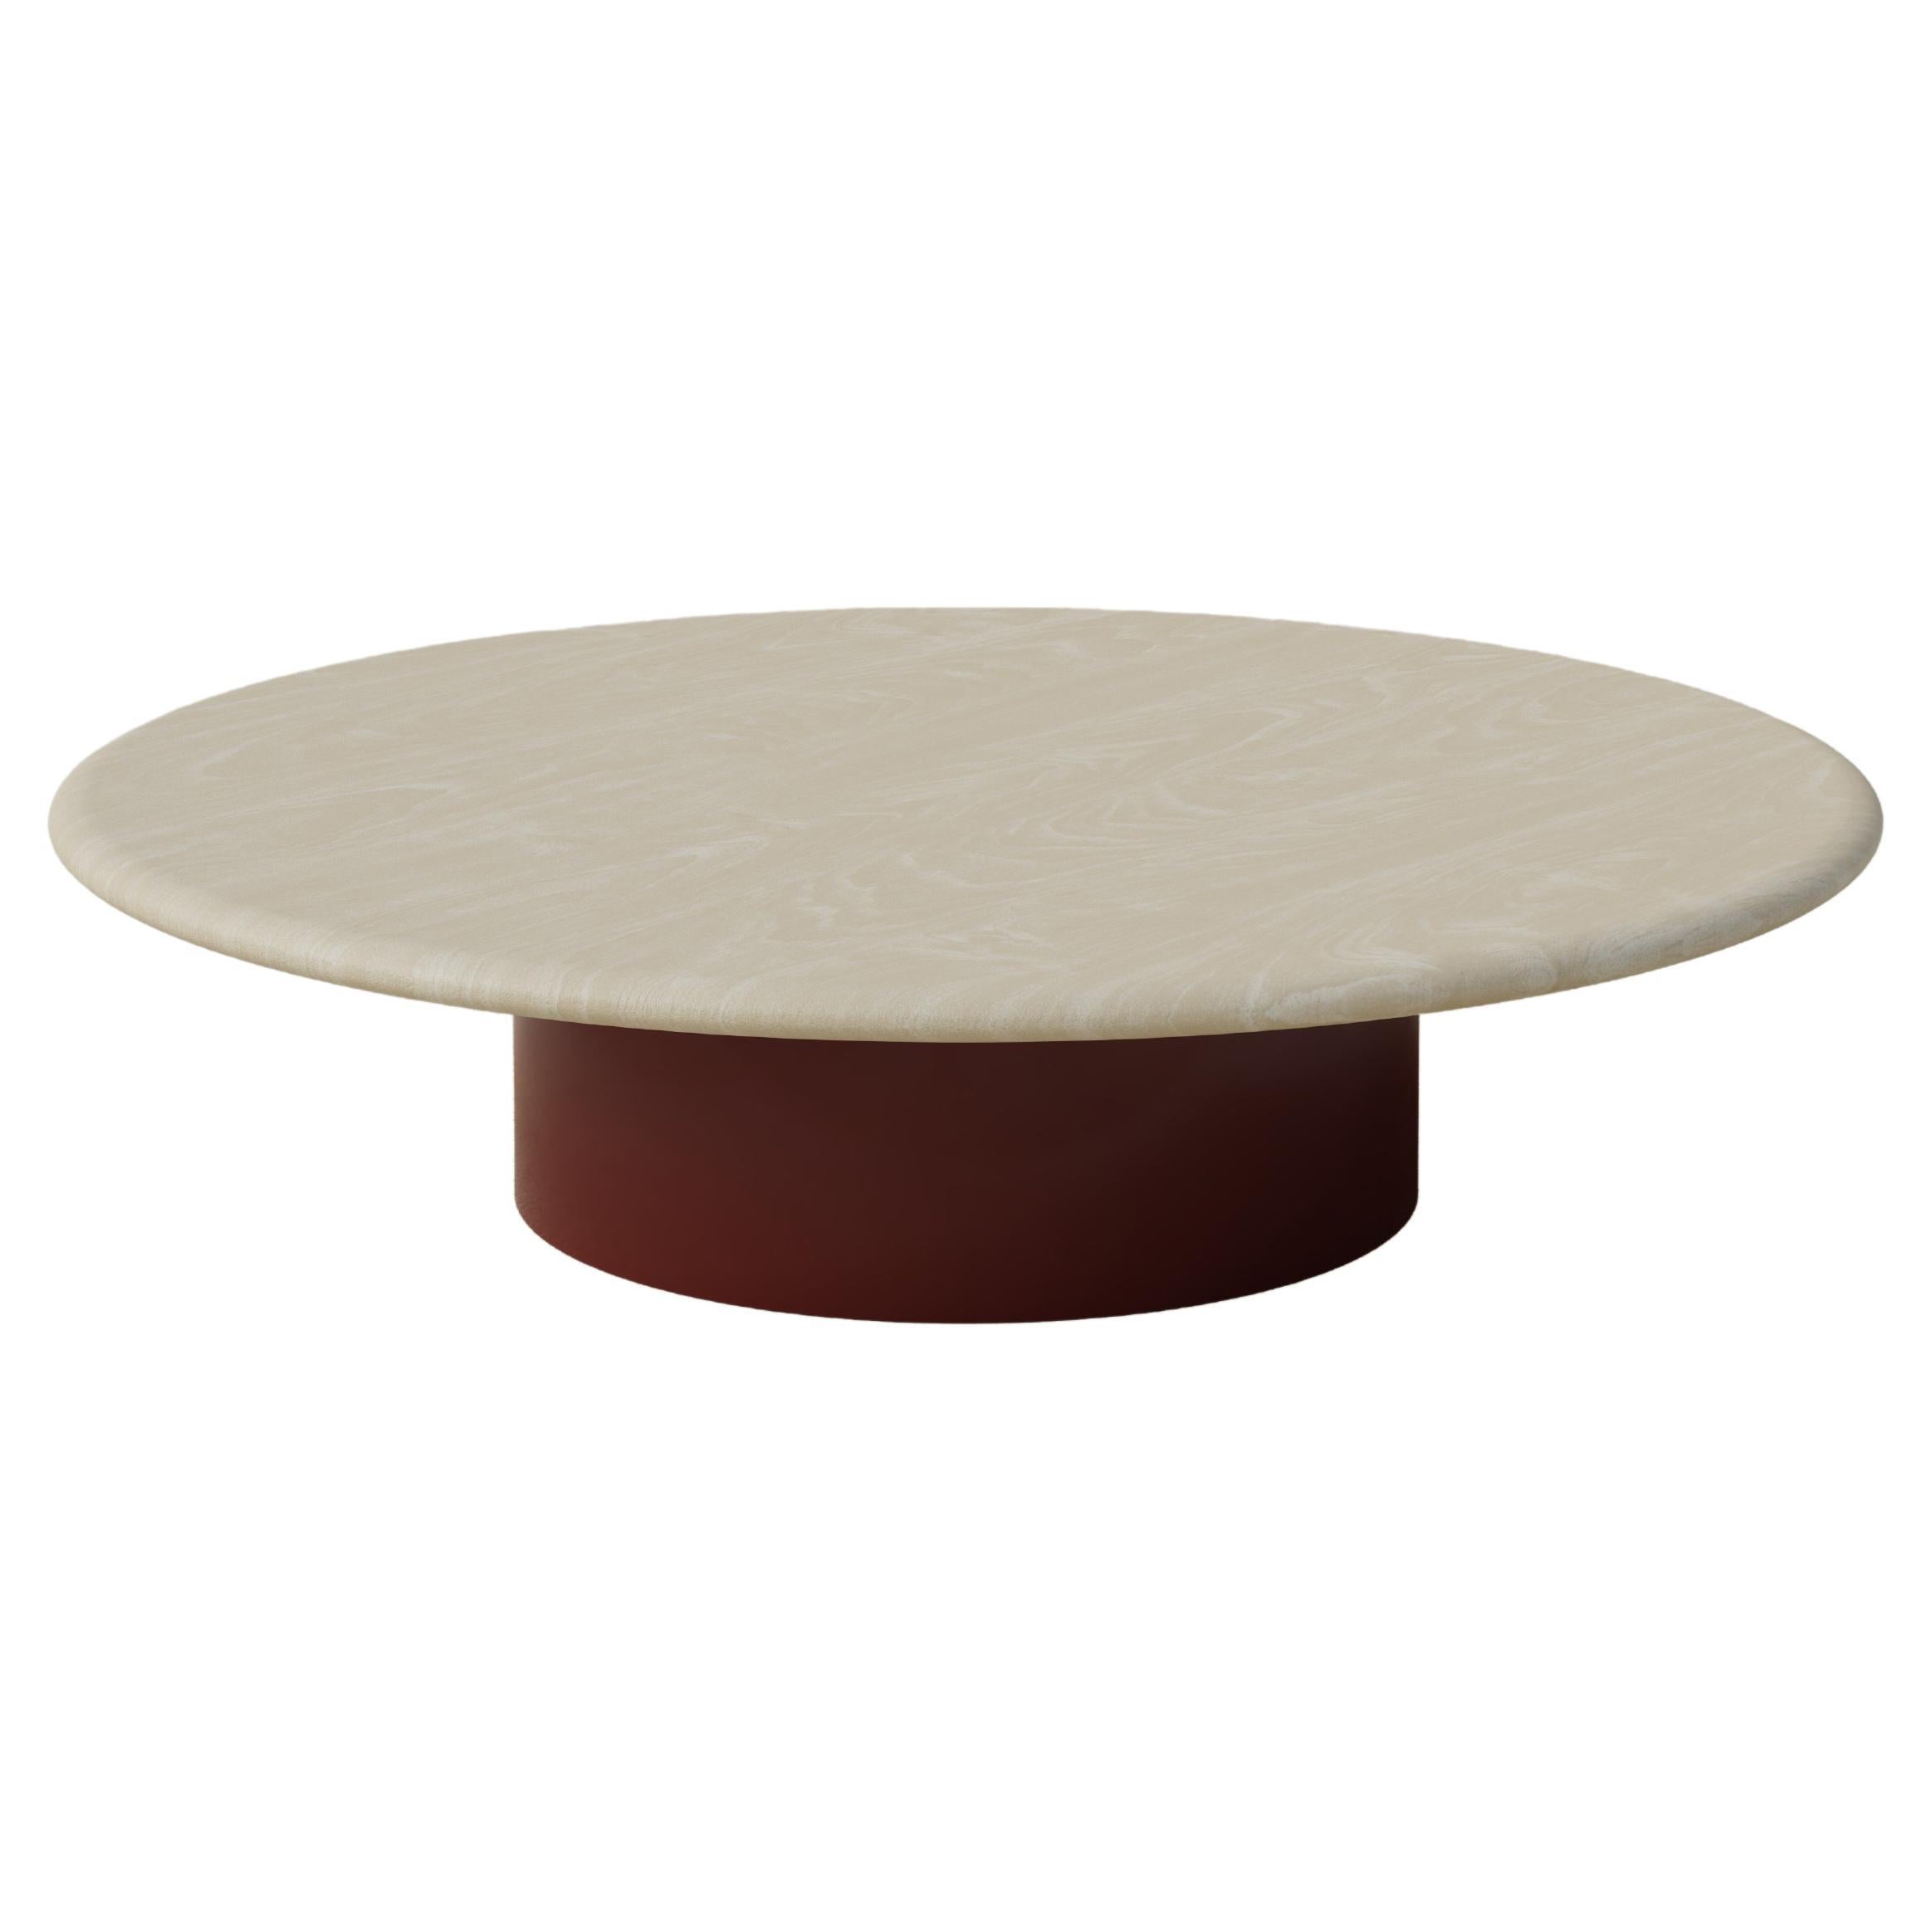 Raindrop Coffee Table, 1000, Ash / Terracotta For Sale